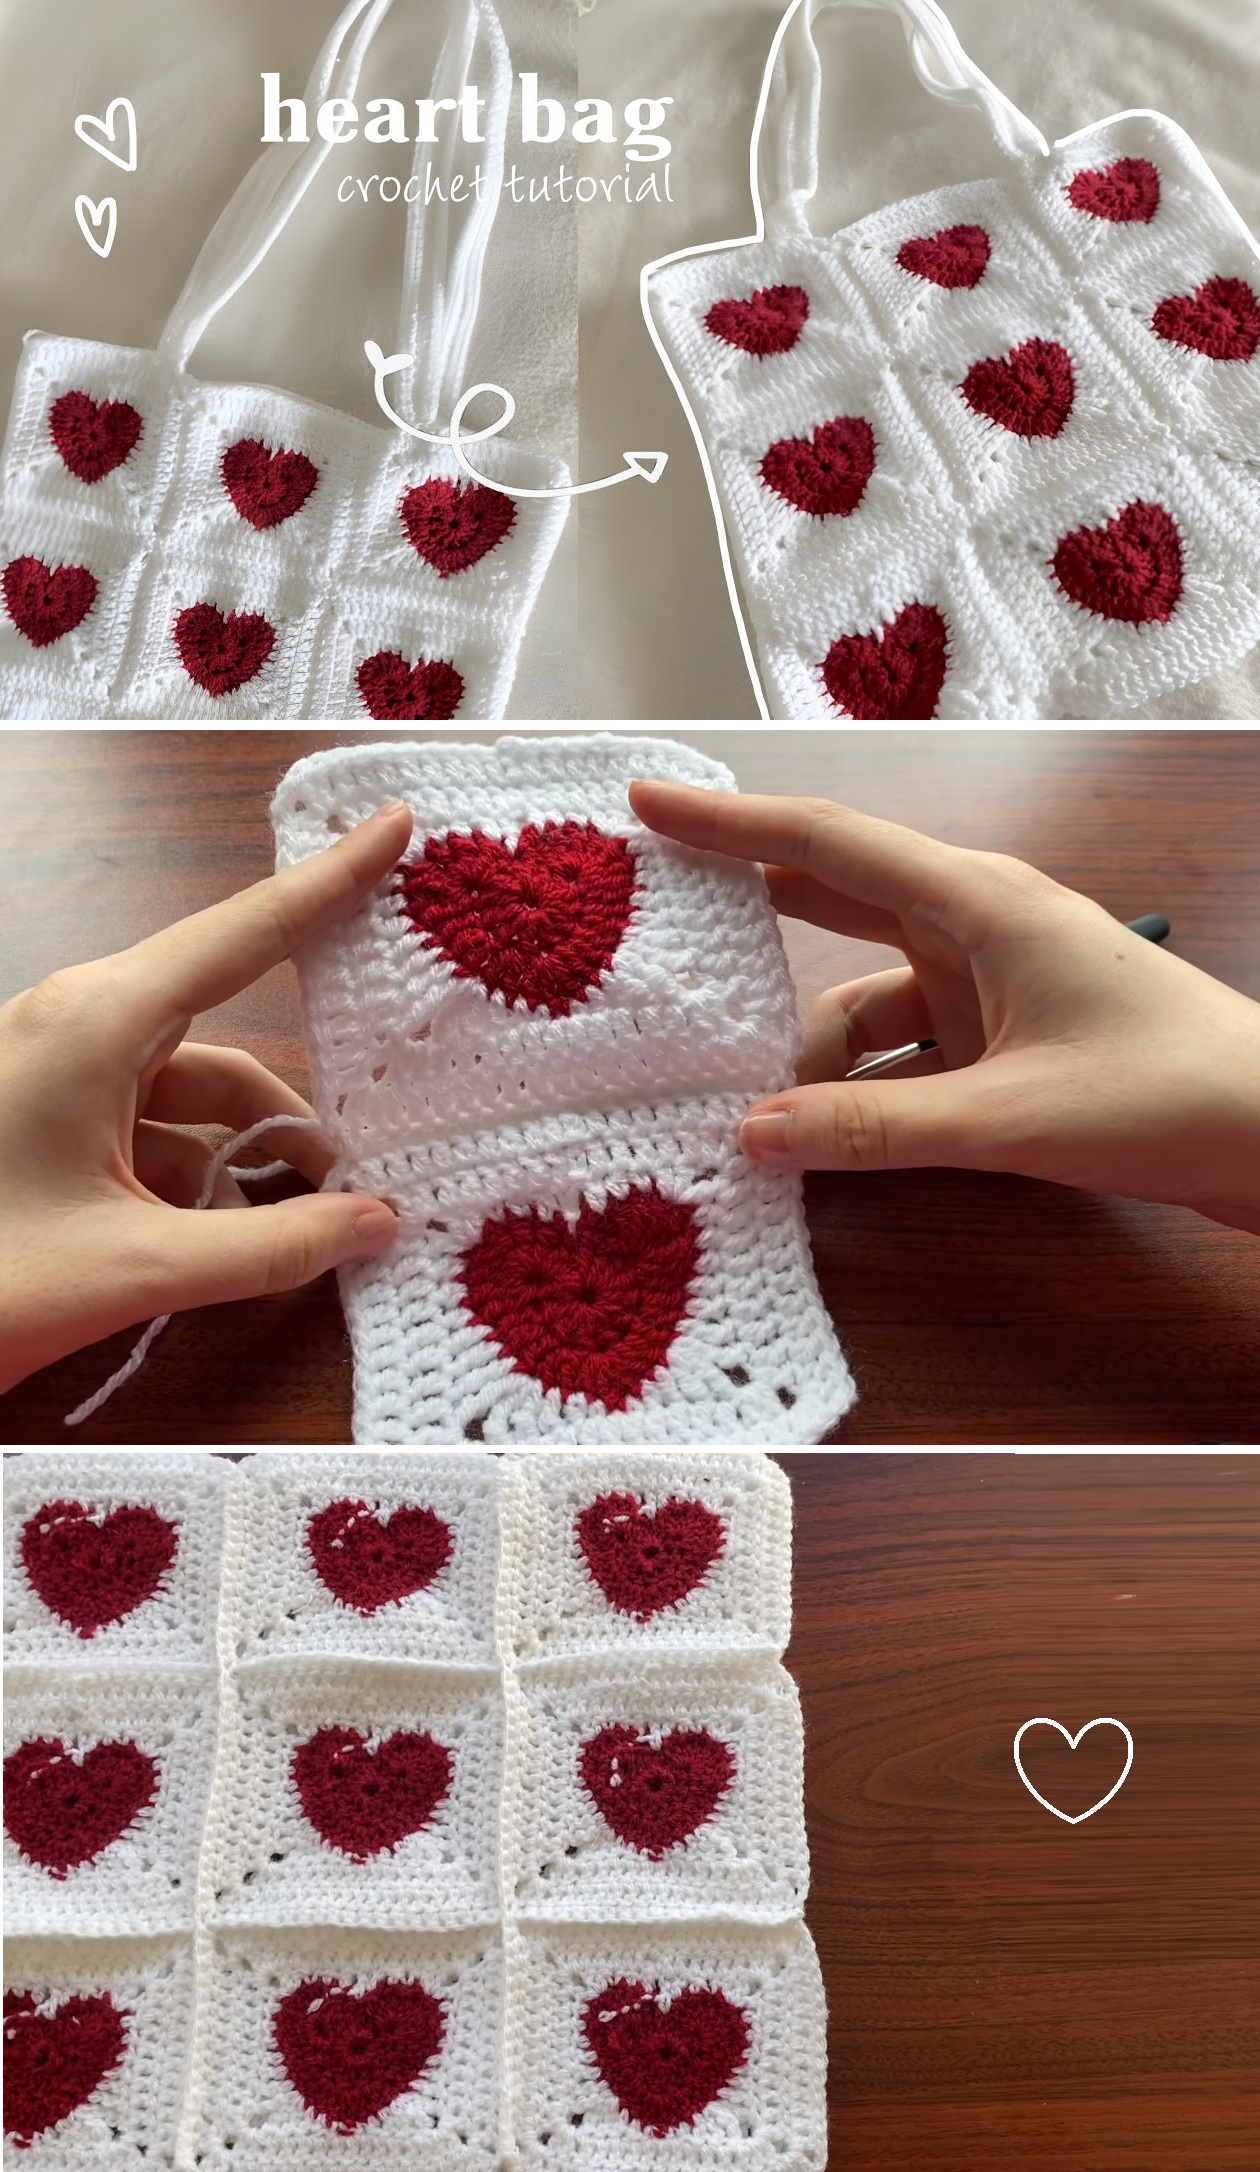 Create a Stylish Crochet Heart Tote Bag from Granny Squares